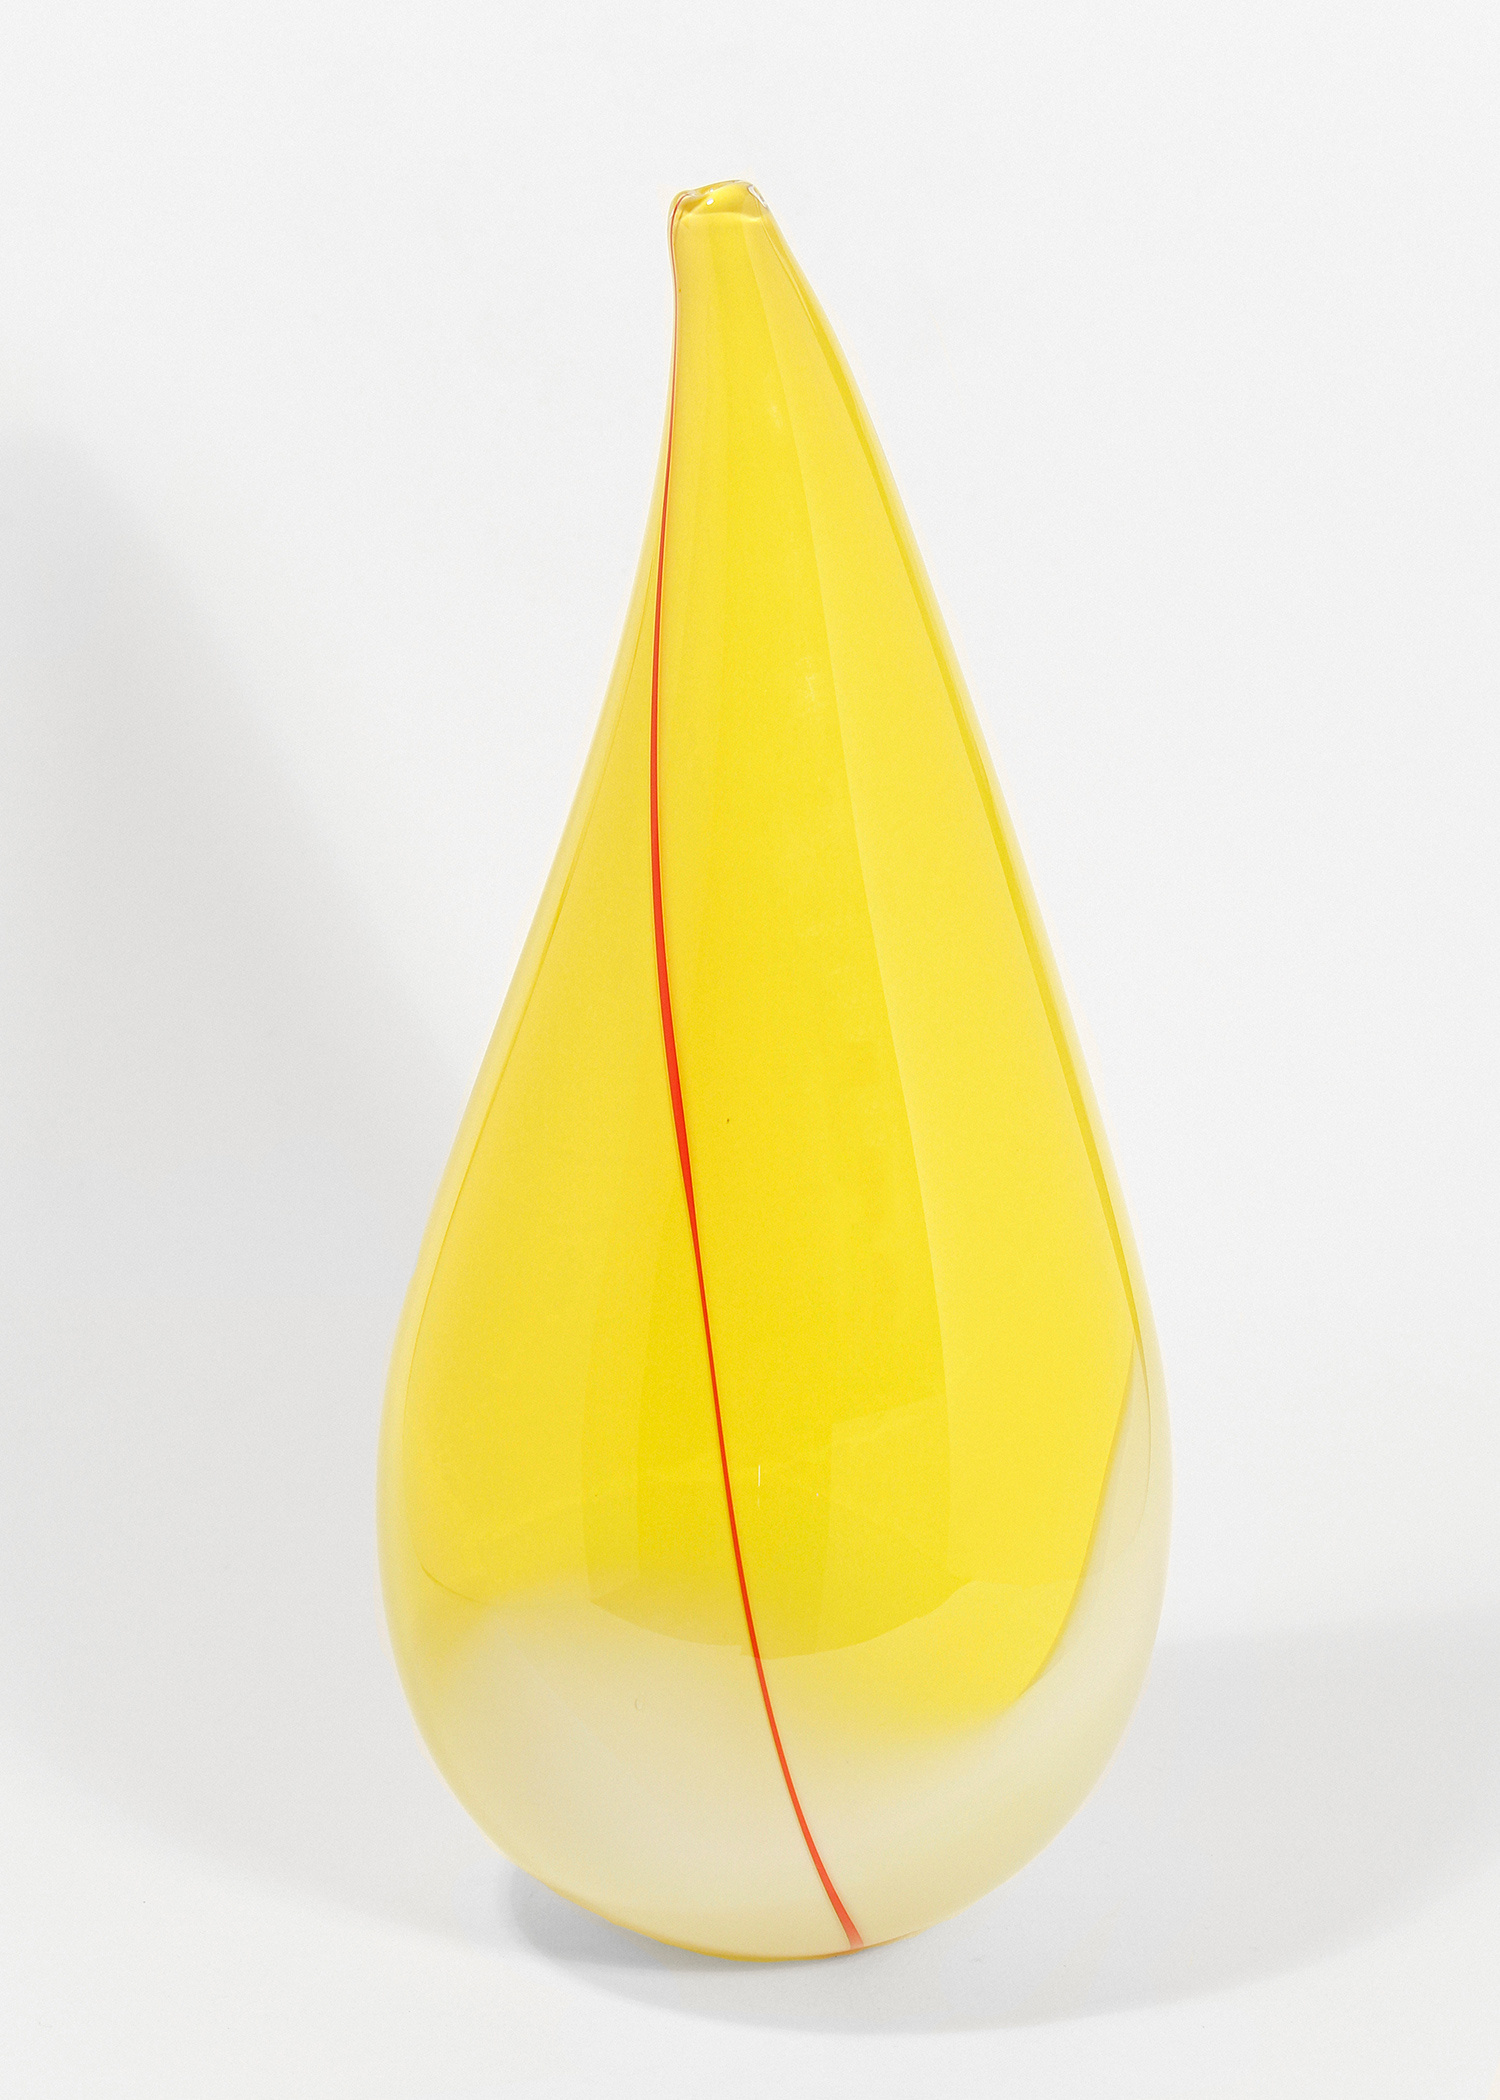 Large Yellow Flame by Alice Heaton